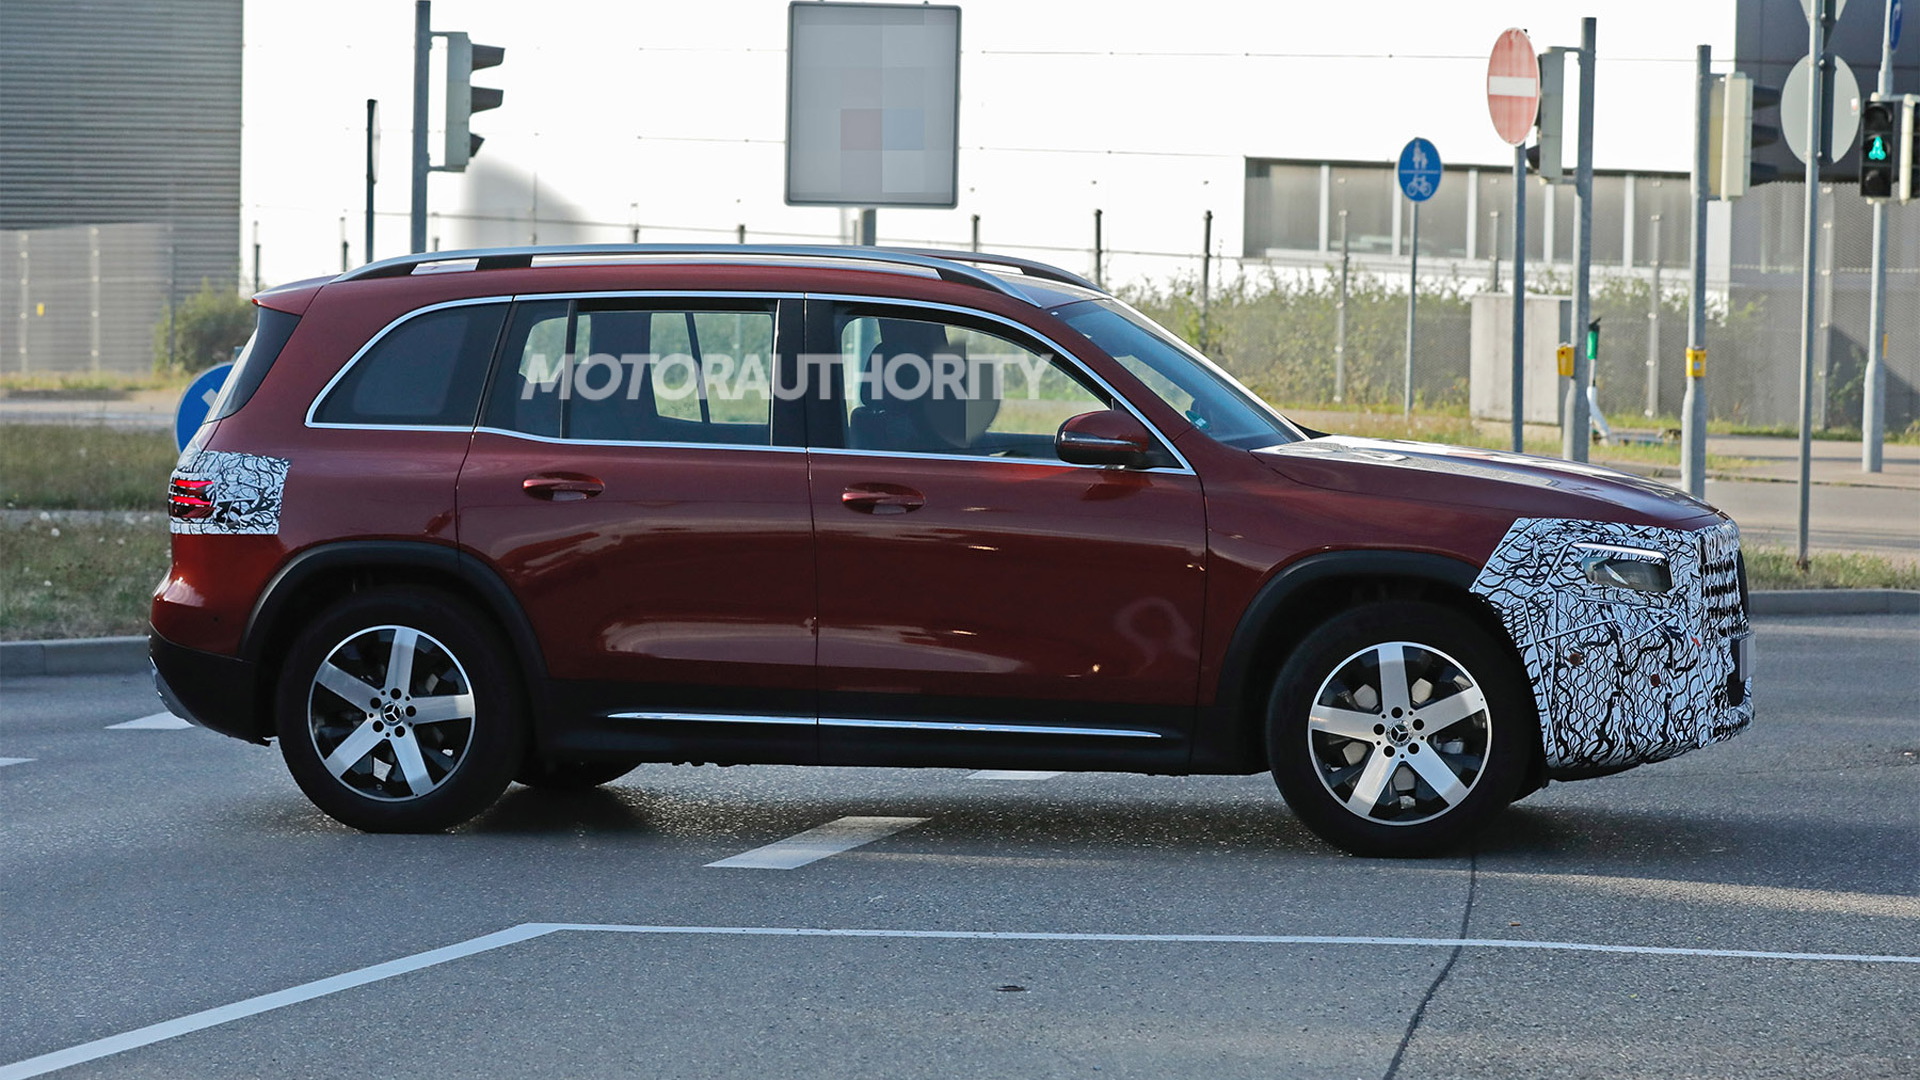 2024 MercedesBenz GLBClass spy shots Boxy compact crossover due for